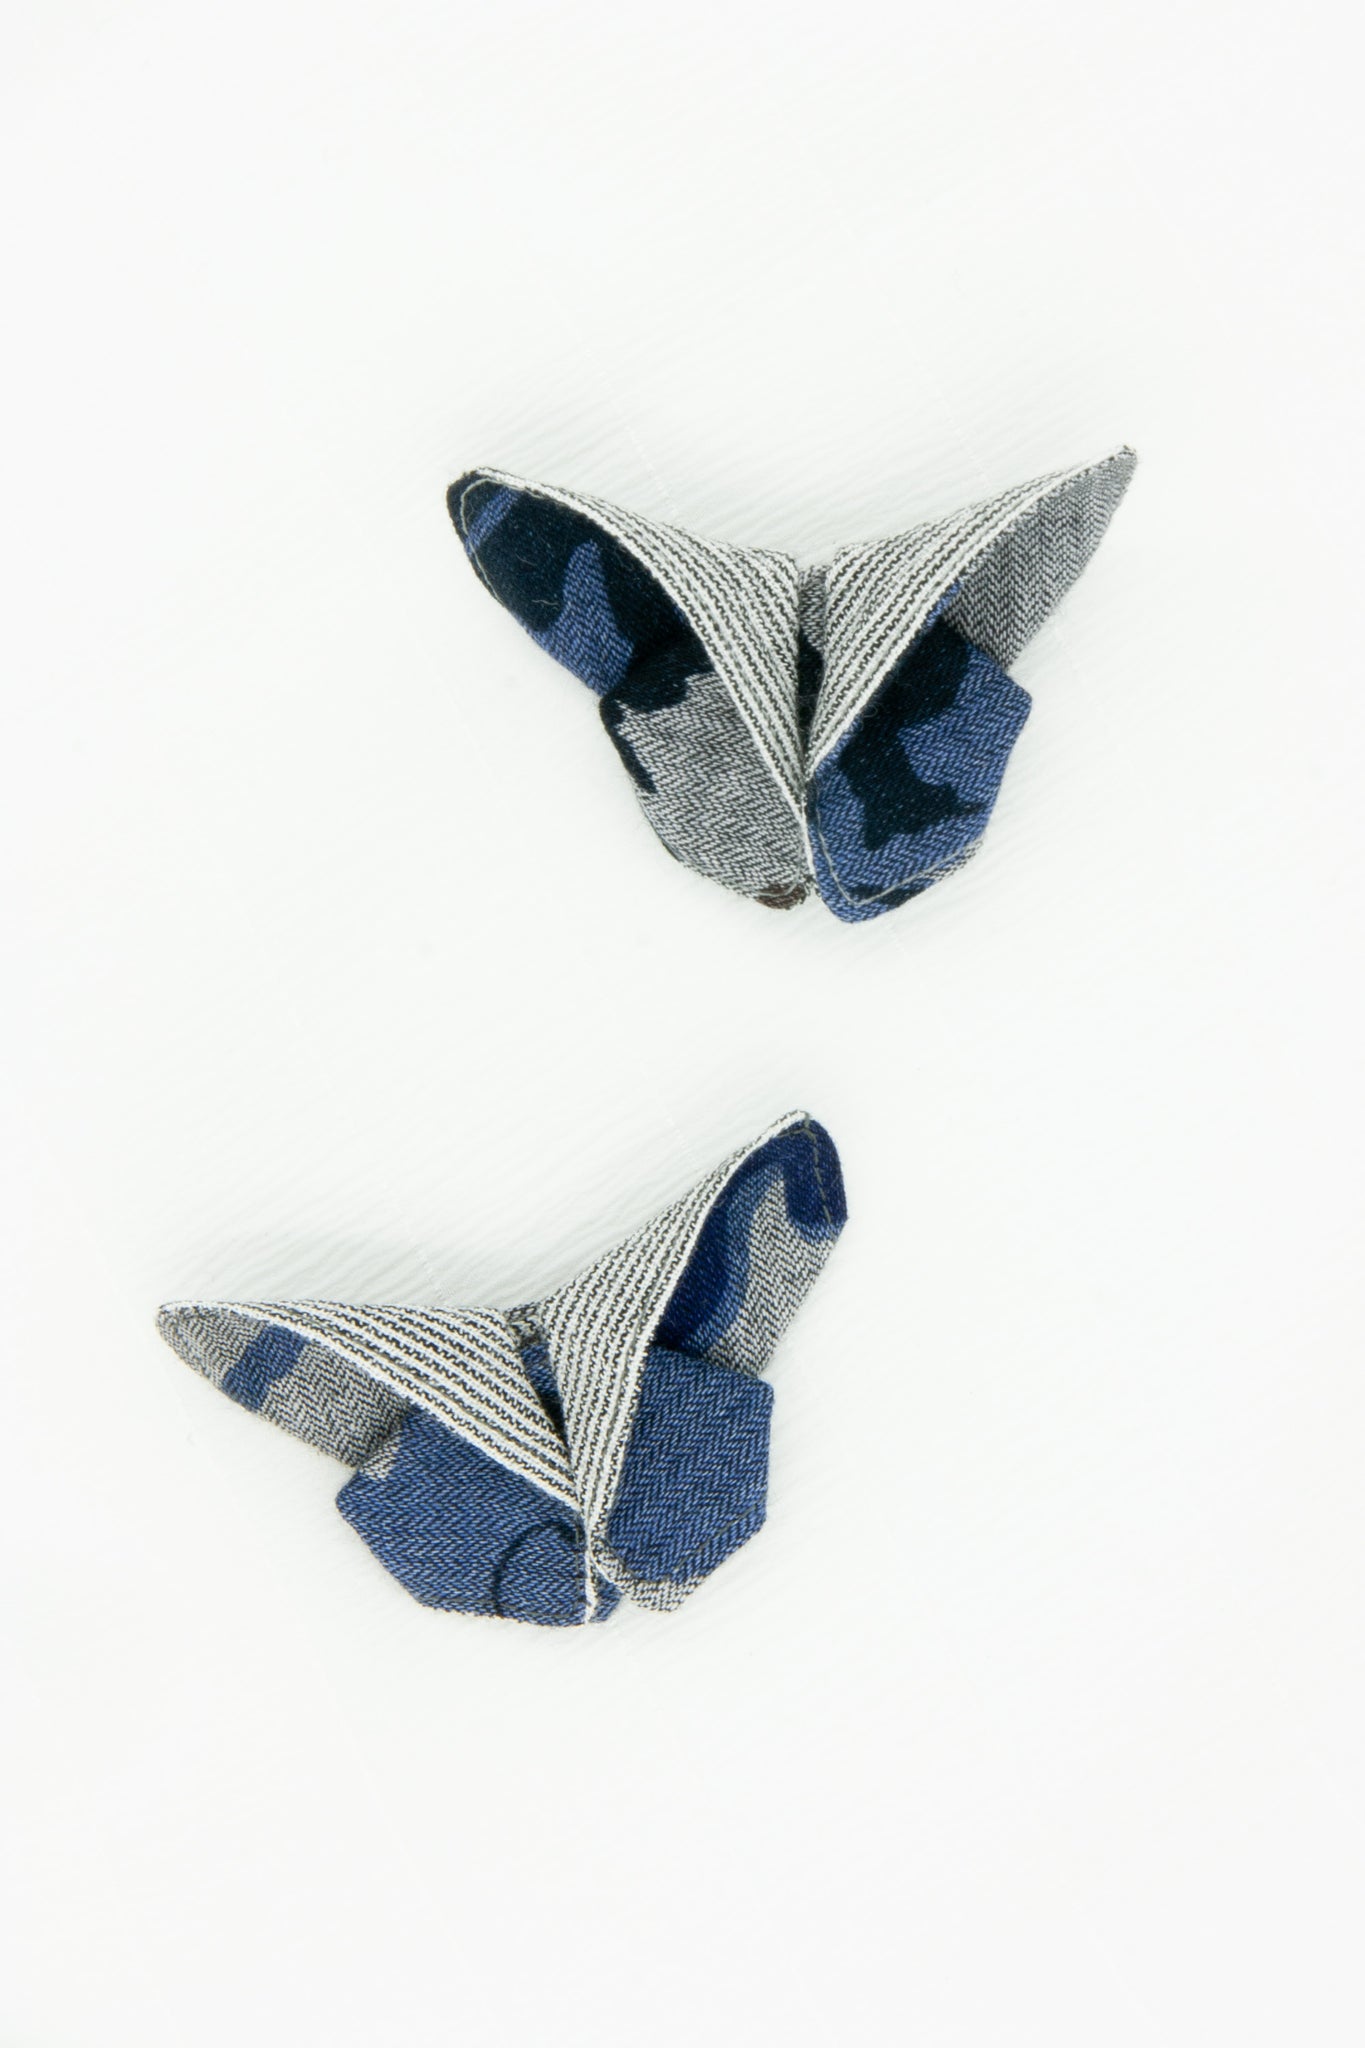 Butterfly Brooch in Blue/Gray Cotton Print and Stripes